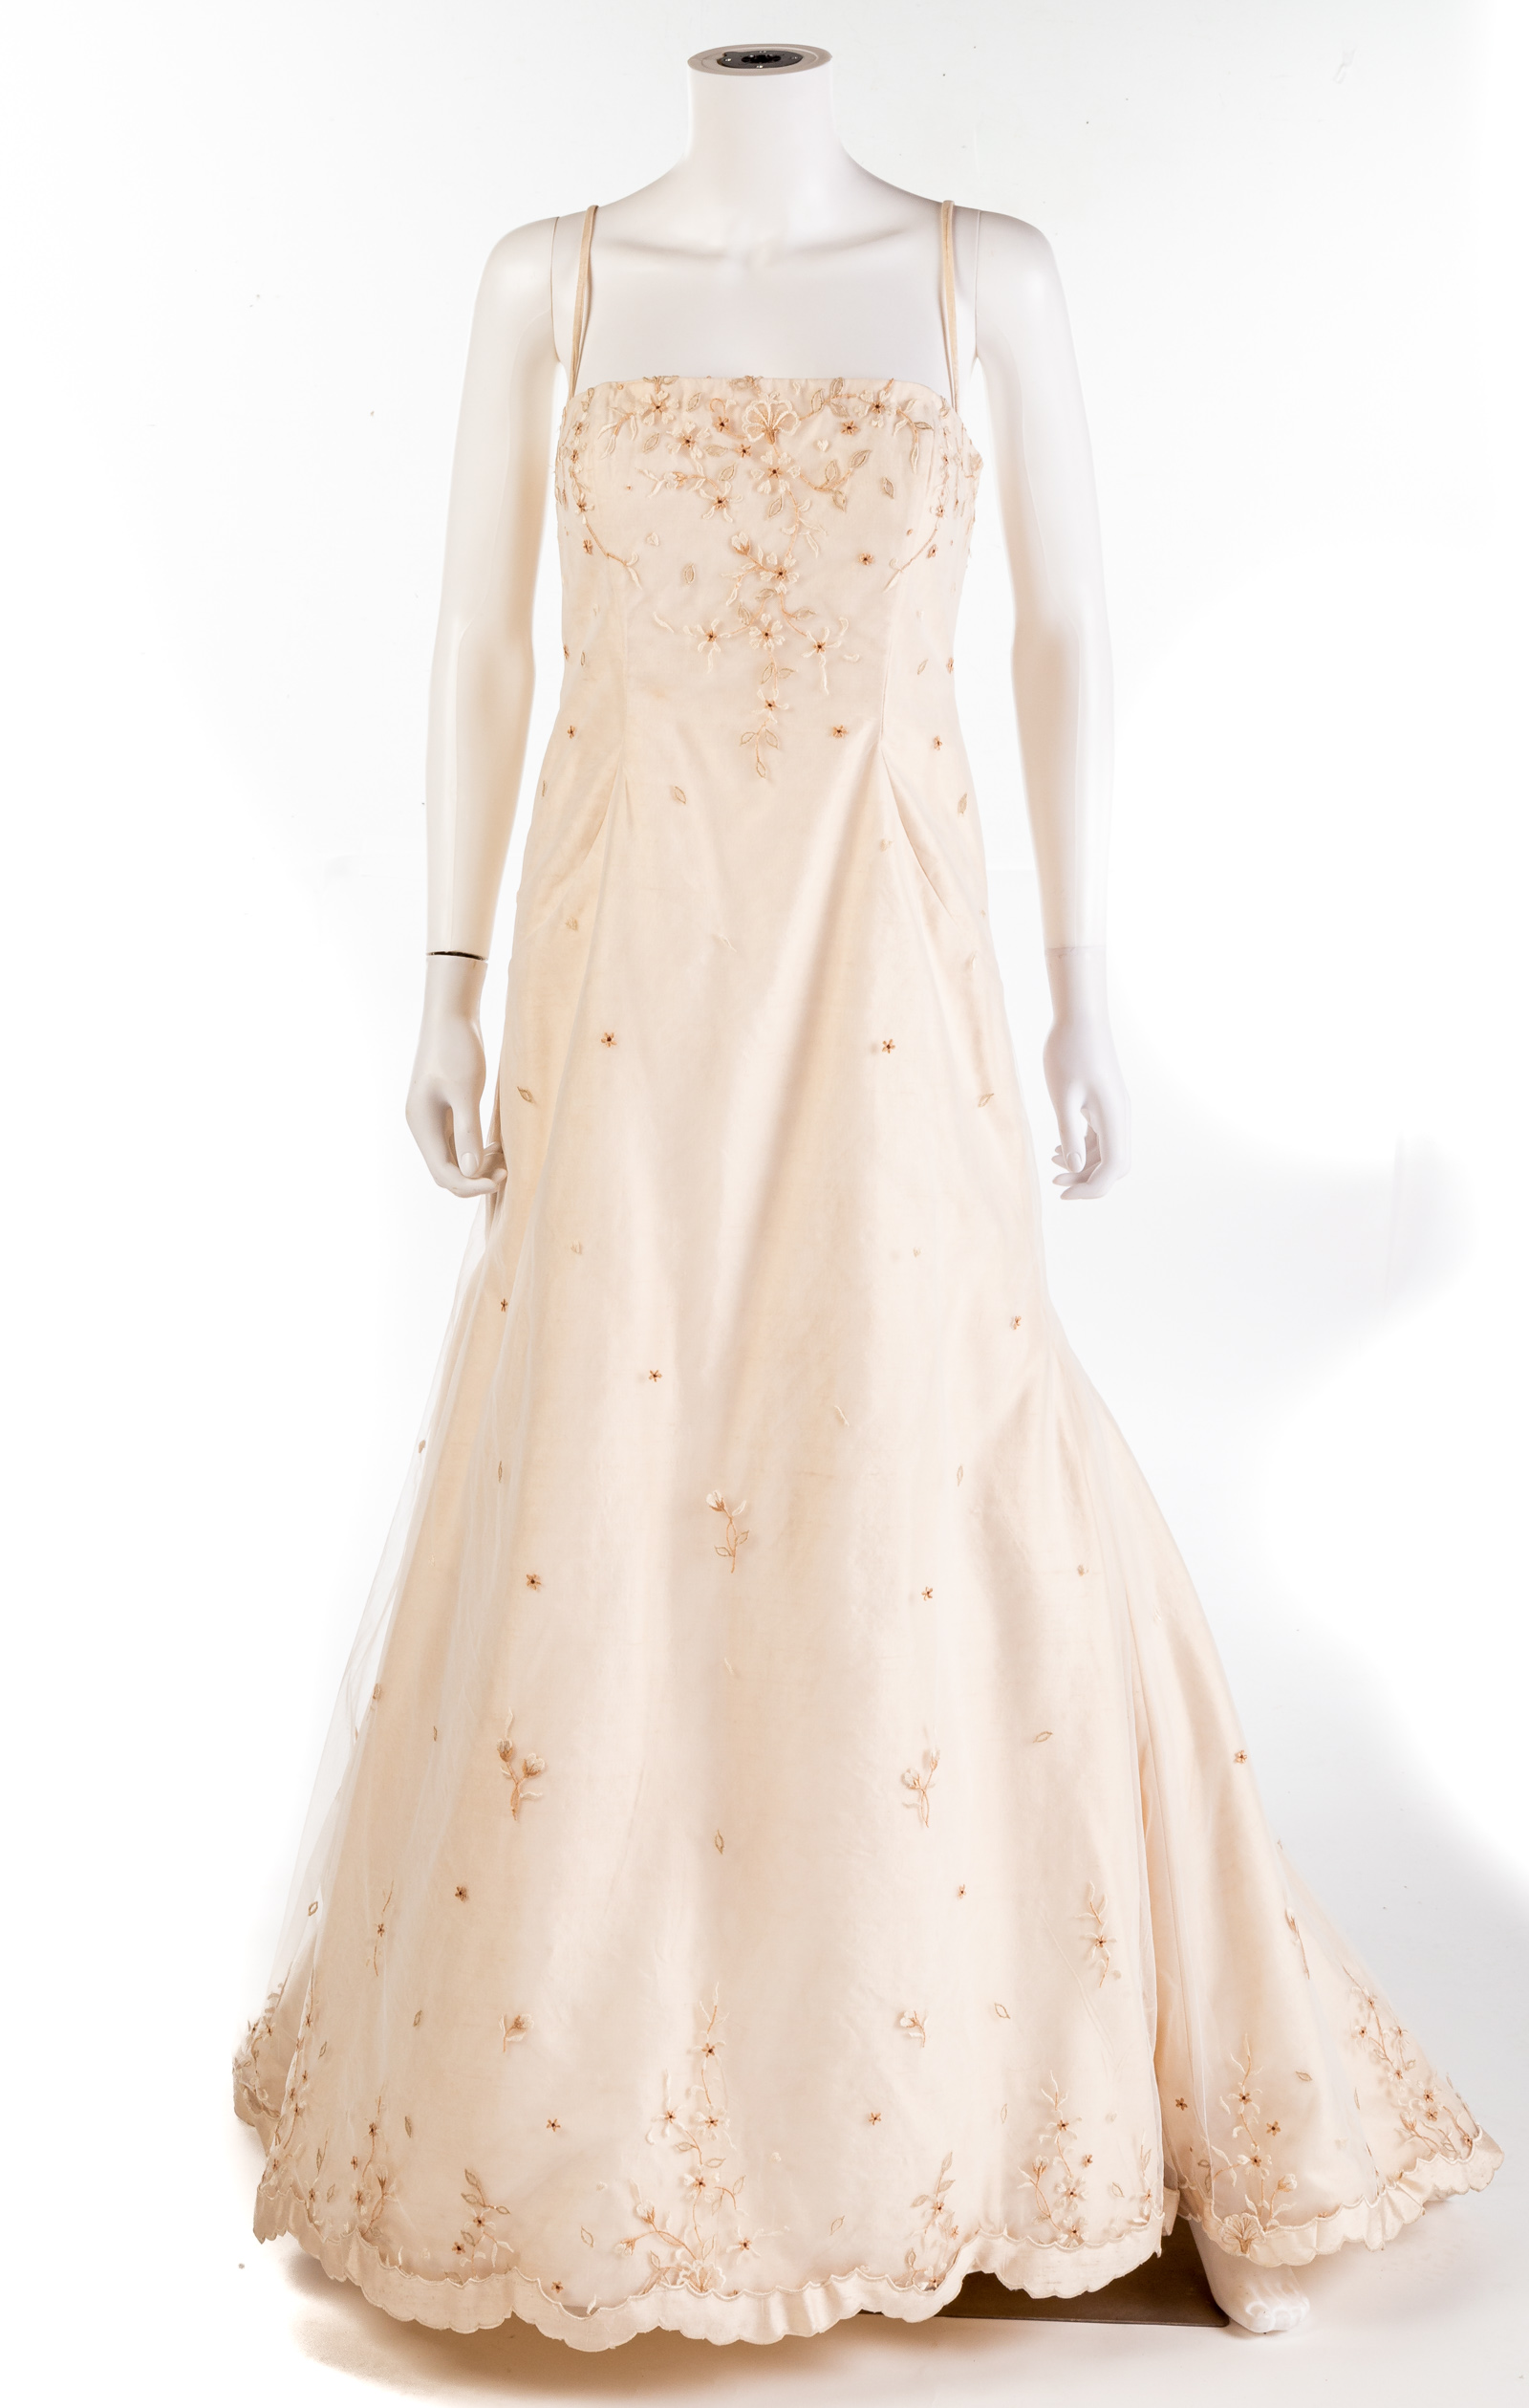 MONIQUE LUO COUTURE EVENING GOWN/WEDDING